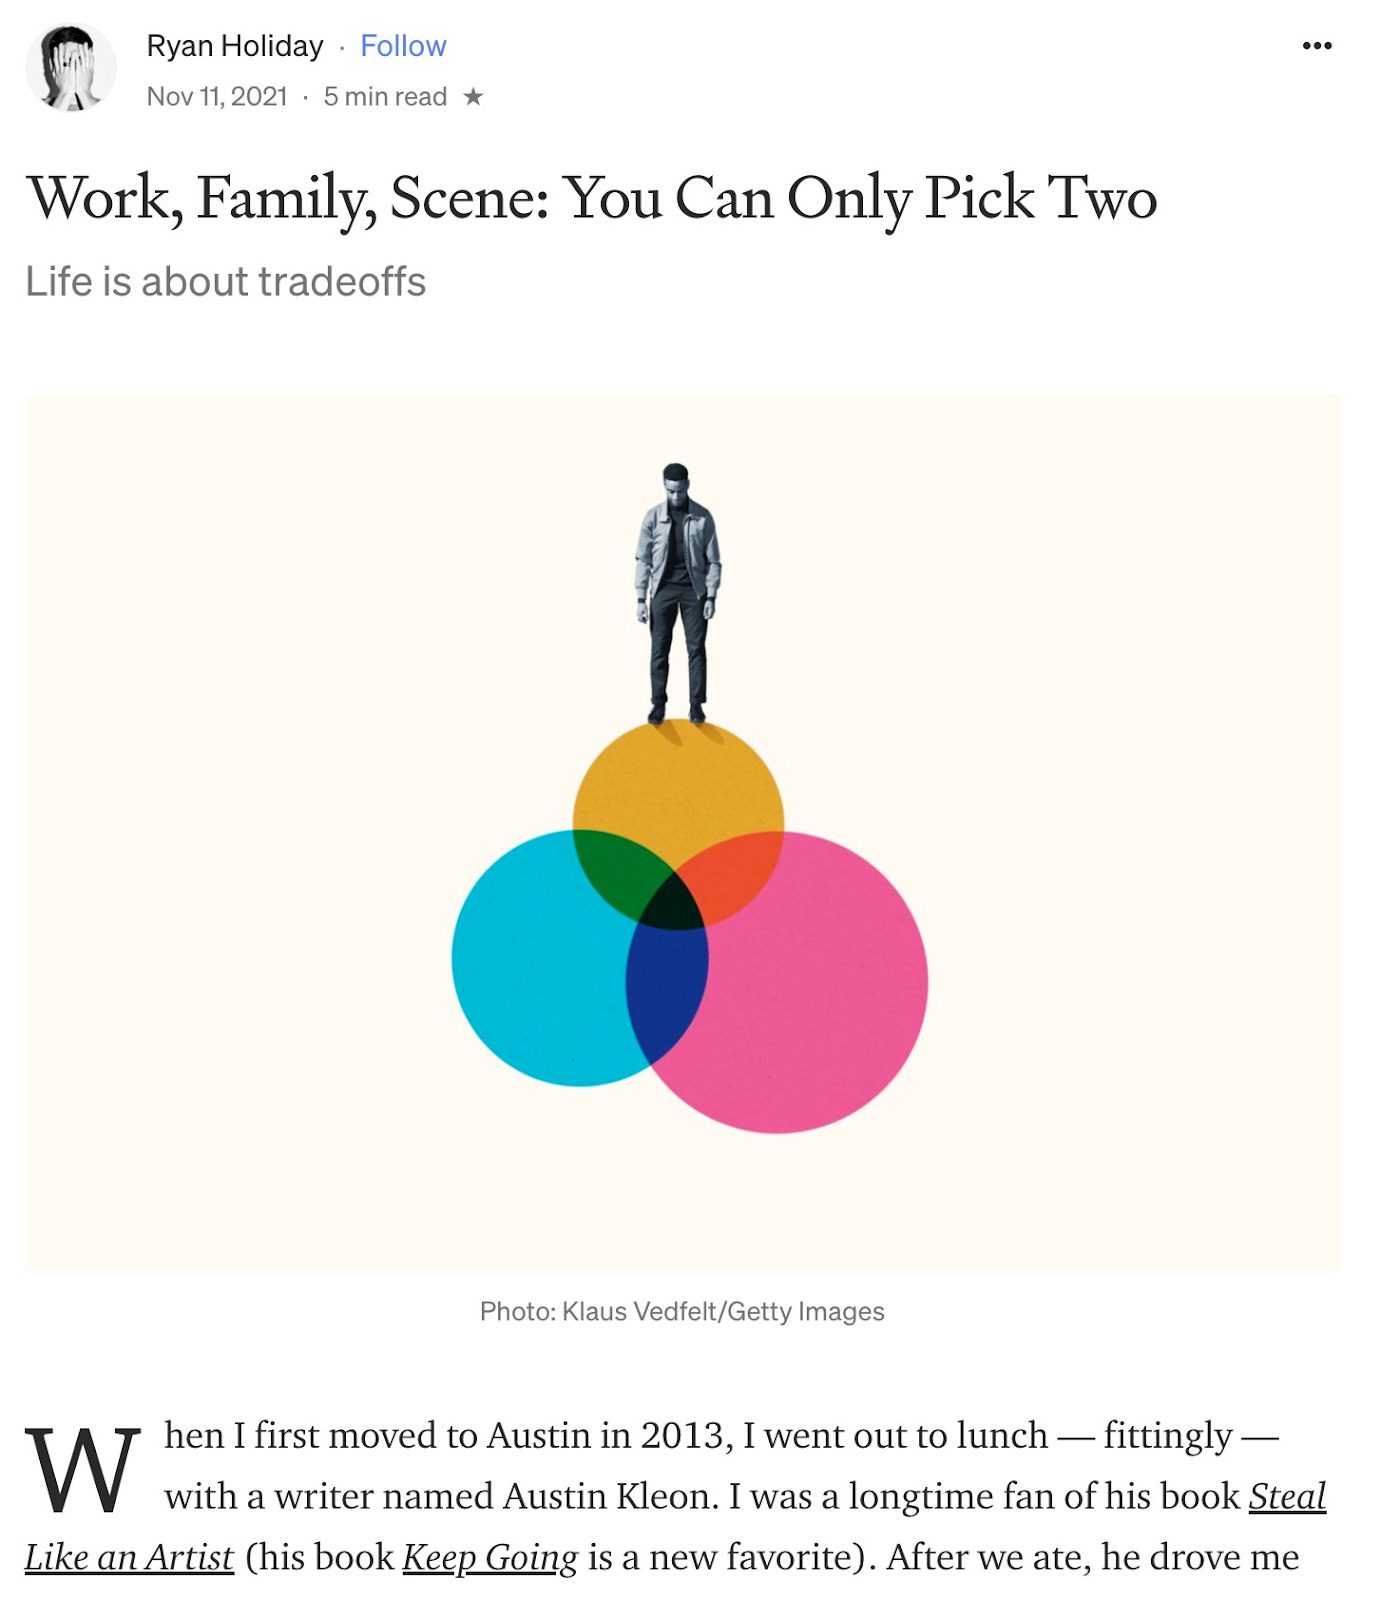 Excerpt of "Work, Family, Scene" article republished on Forge